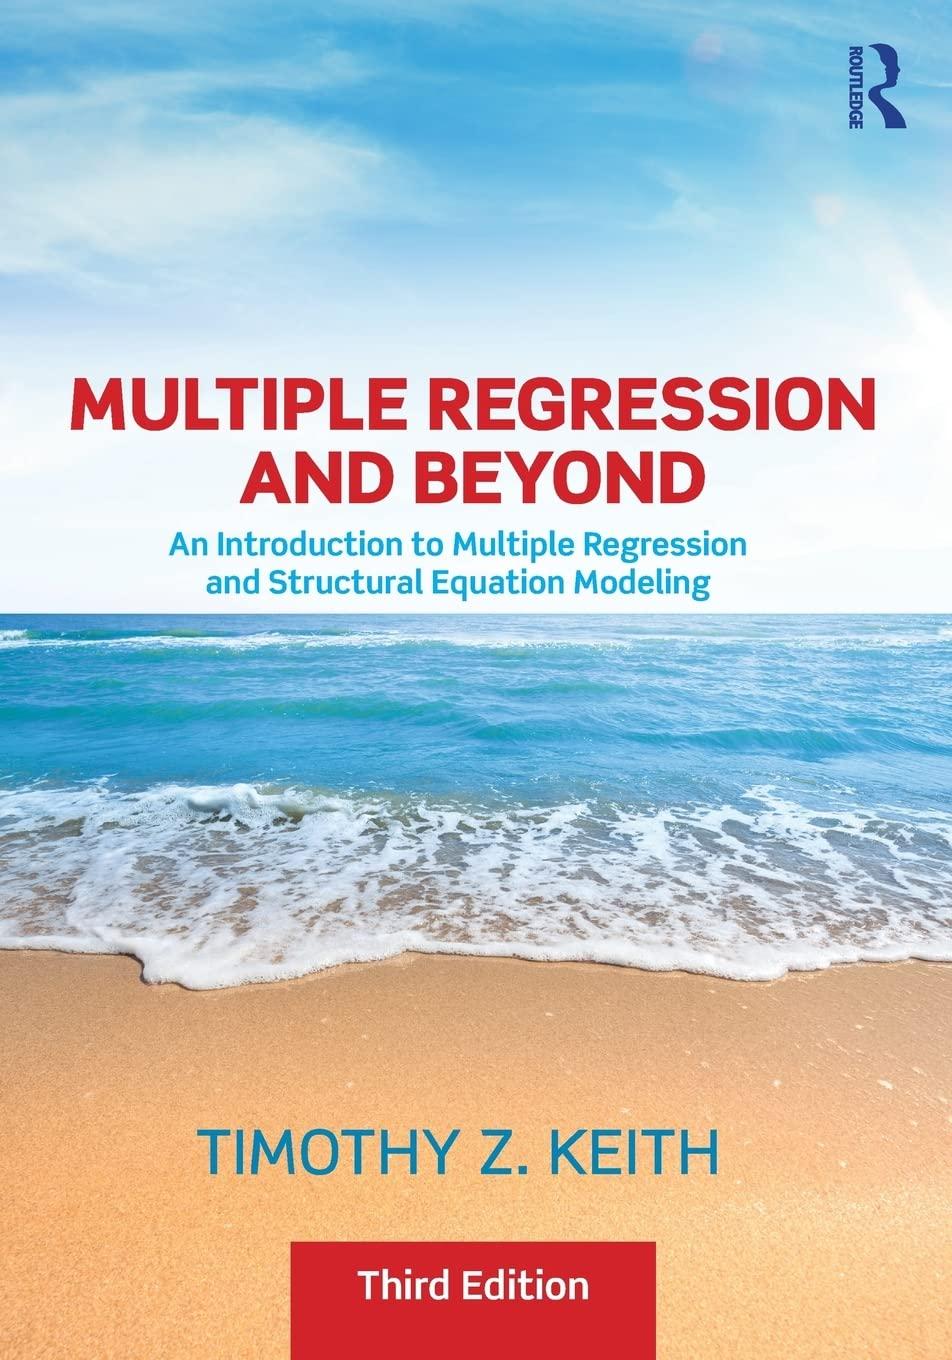 multiple regression and beyond 3rd edition timothy z. keith 1138061441, 978-1138061446